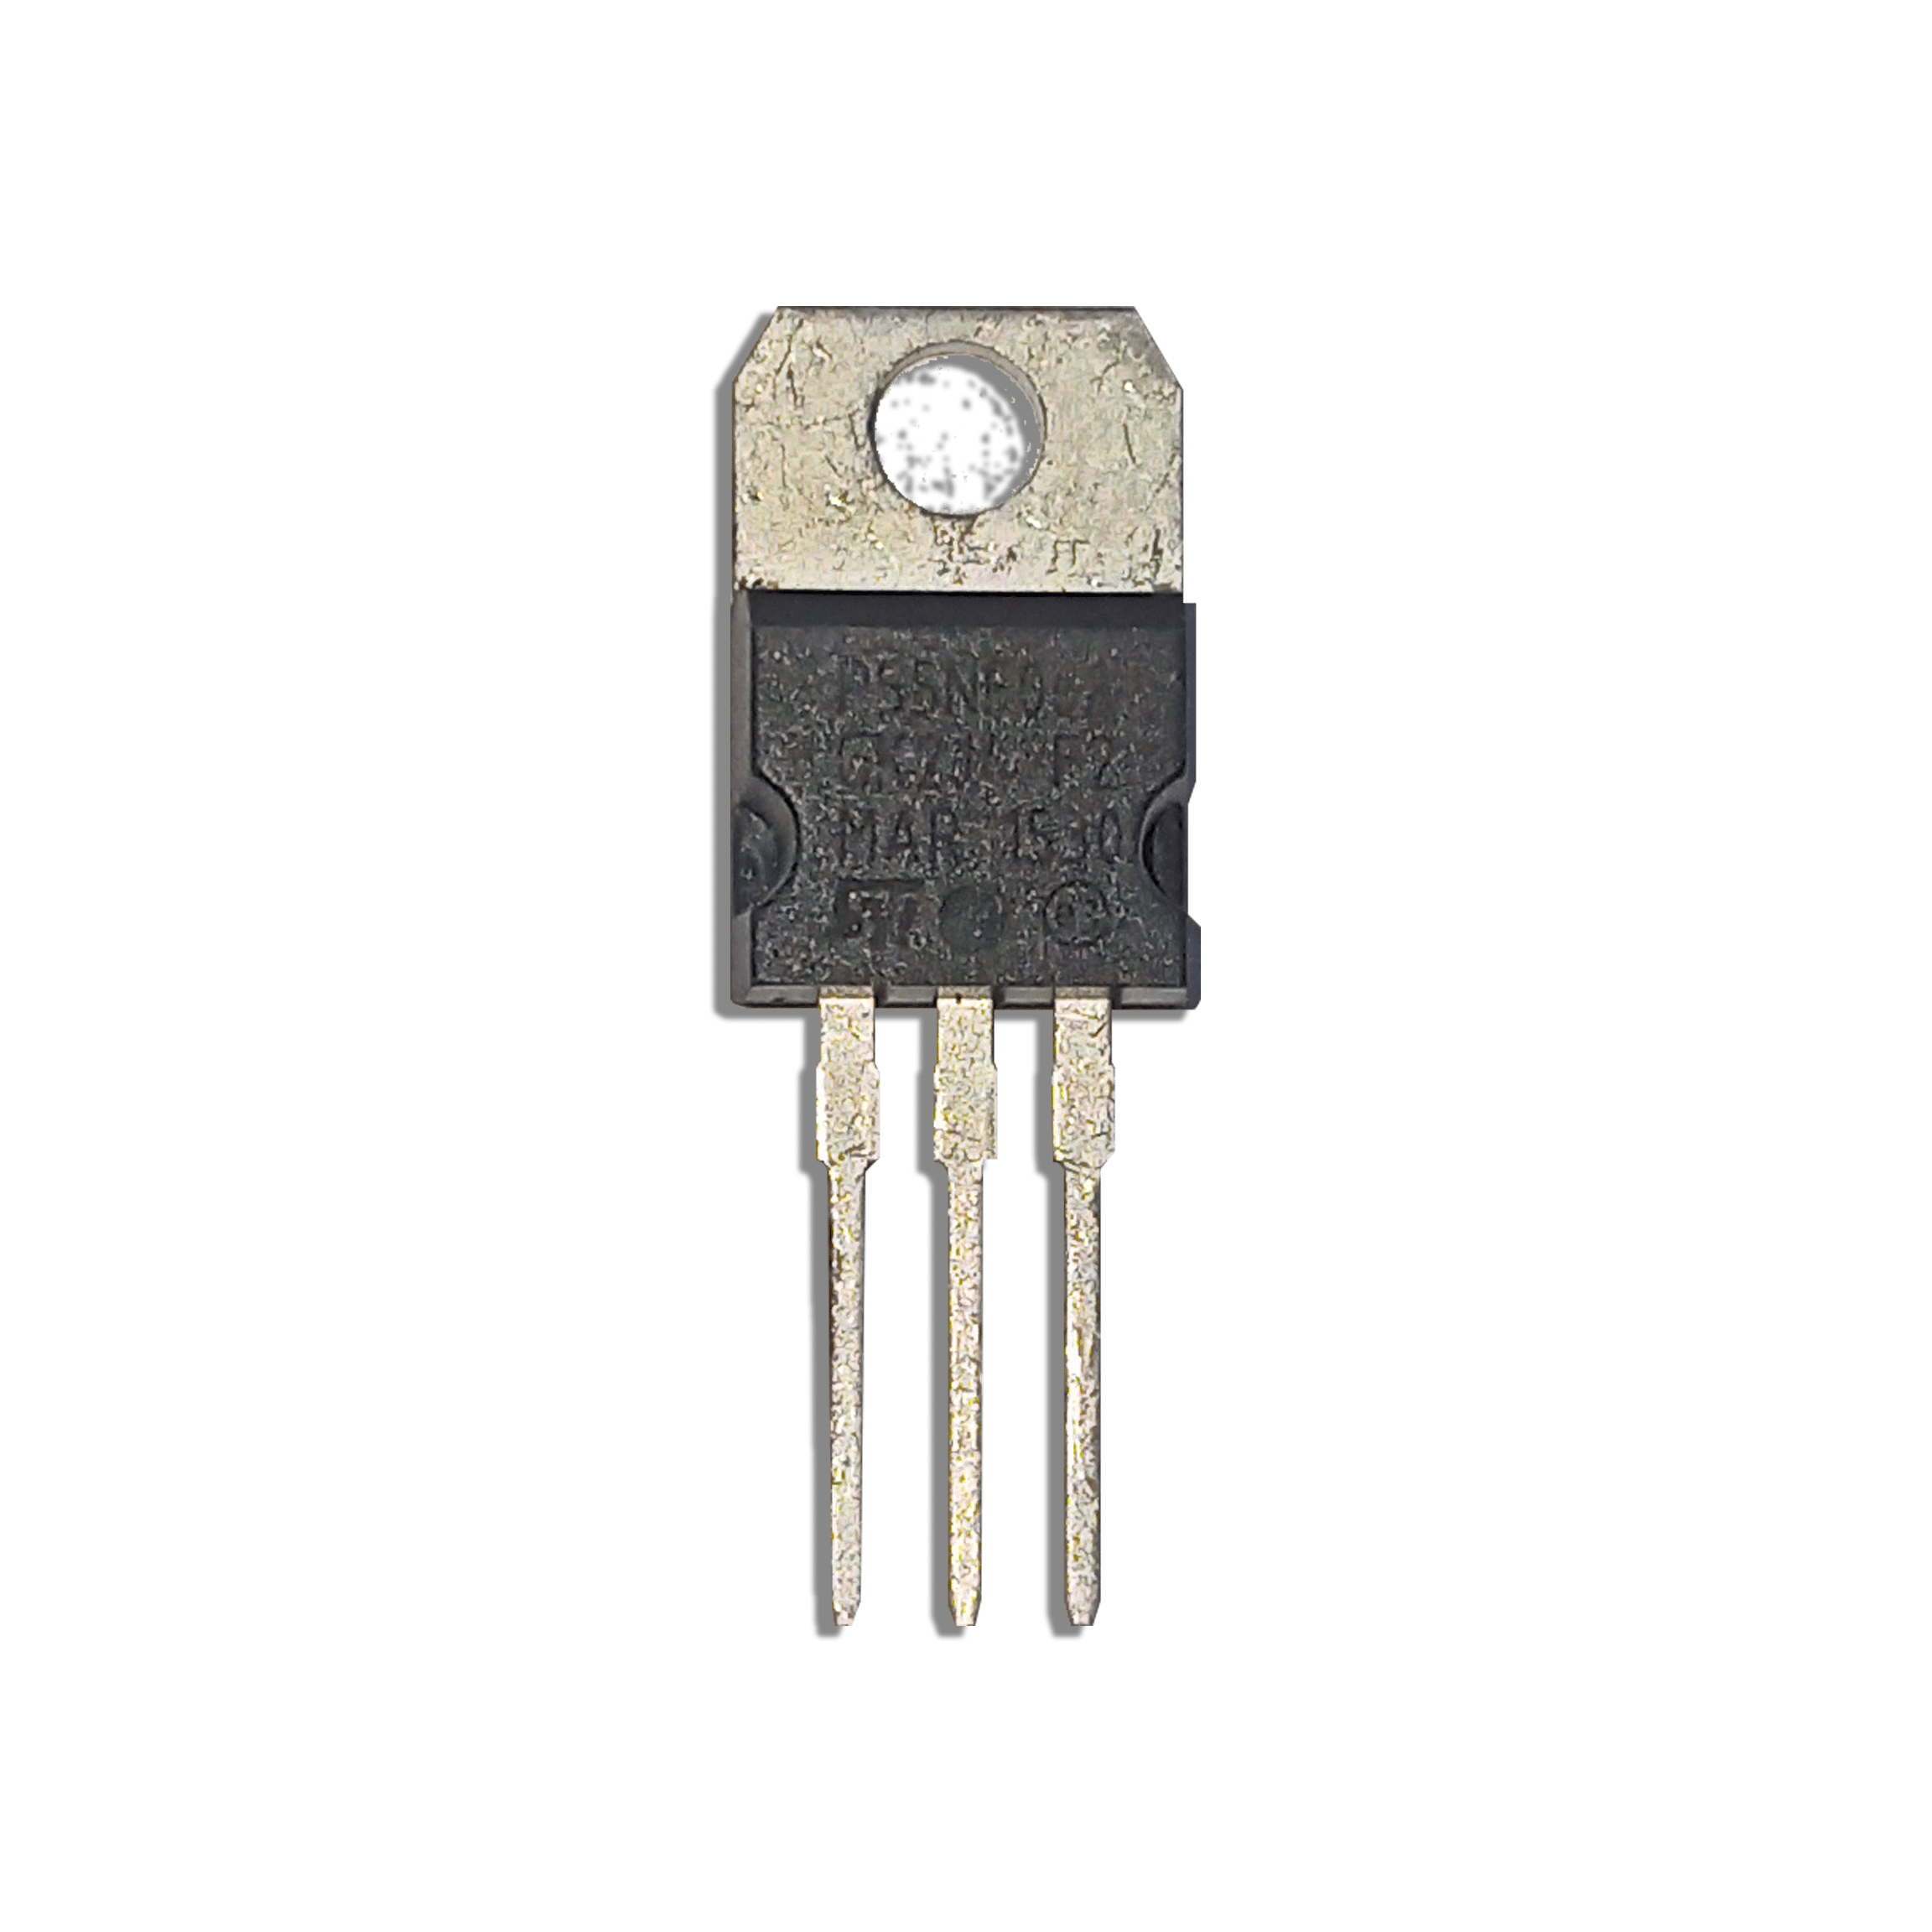 P55NF06 Mosfet available in Punoscho store